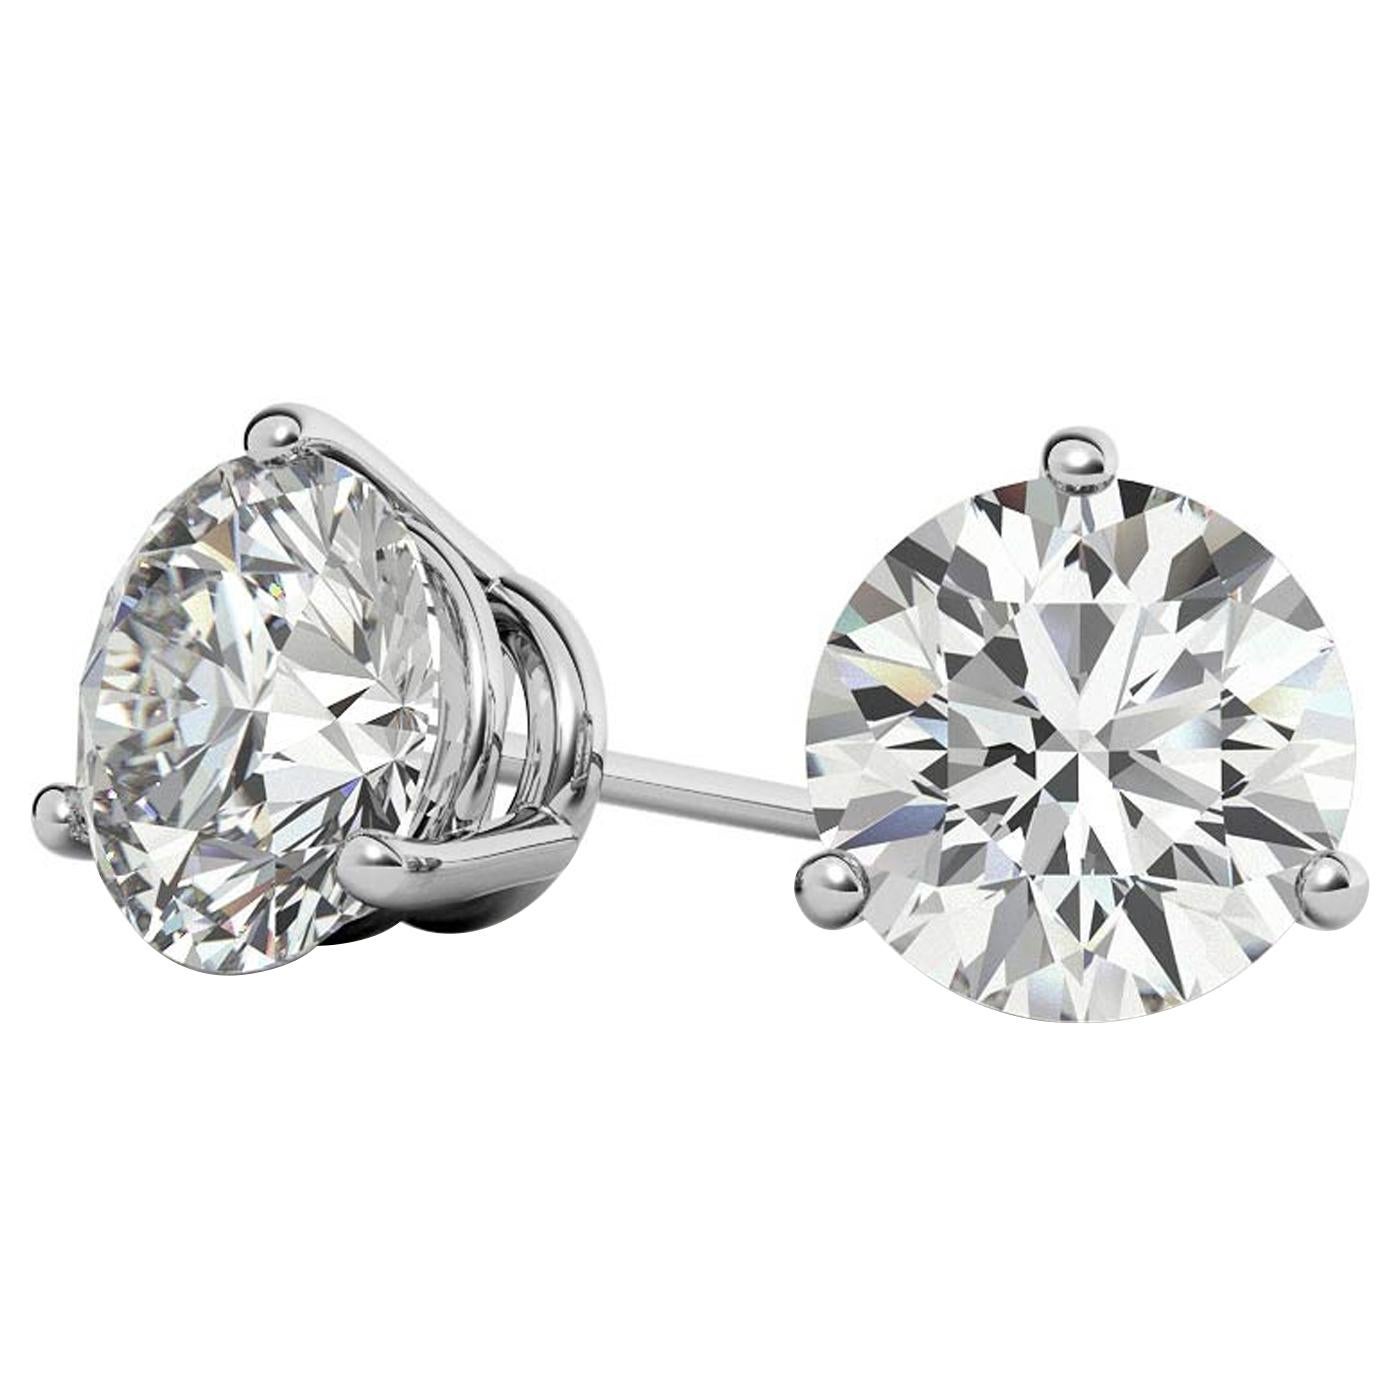 These beautiful natural round stud earrings feature a 3-prong basket design. These earring settings have been specially designed to rest as close to the ear as possible to prevent drooping of the earring. set in 14 Karat white gold. Each three-prong